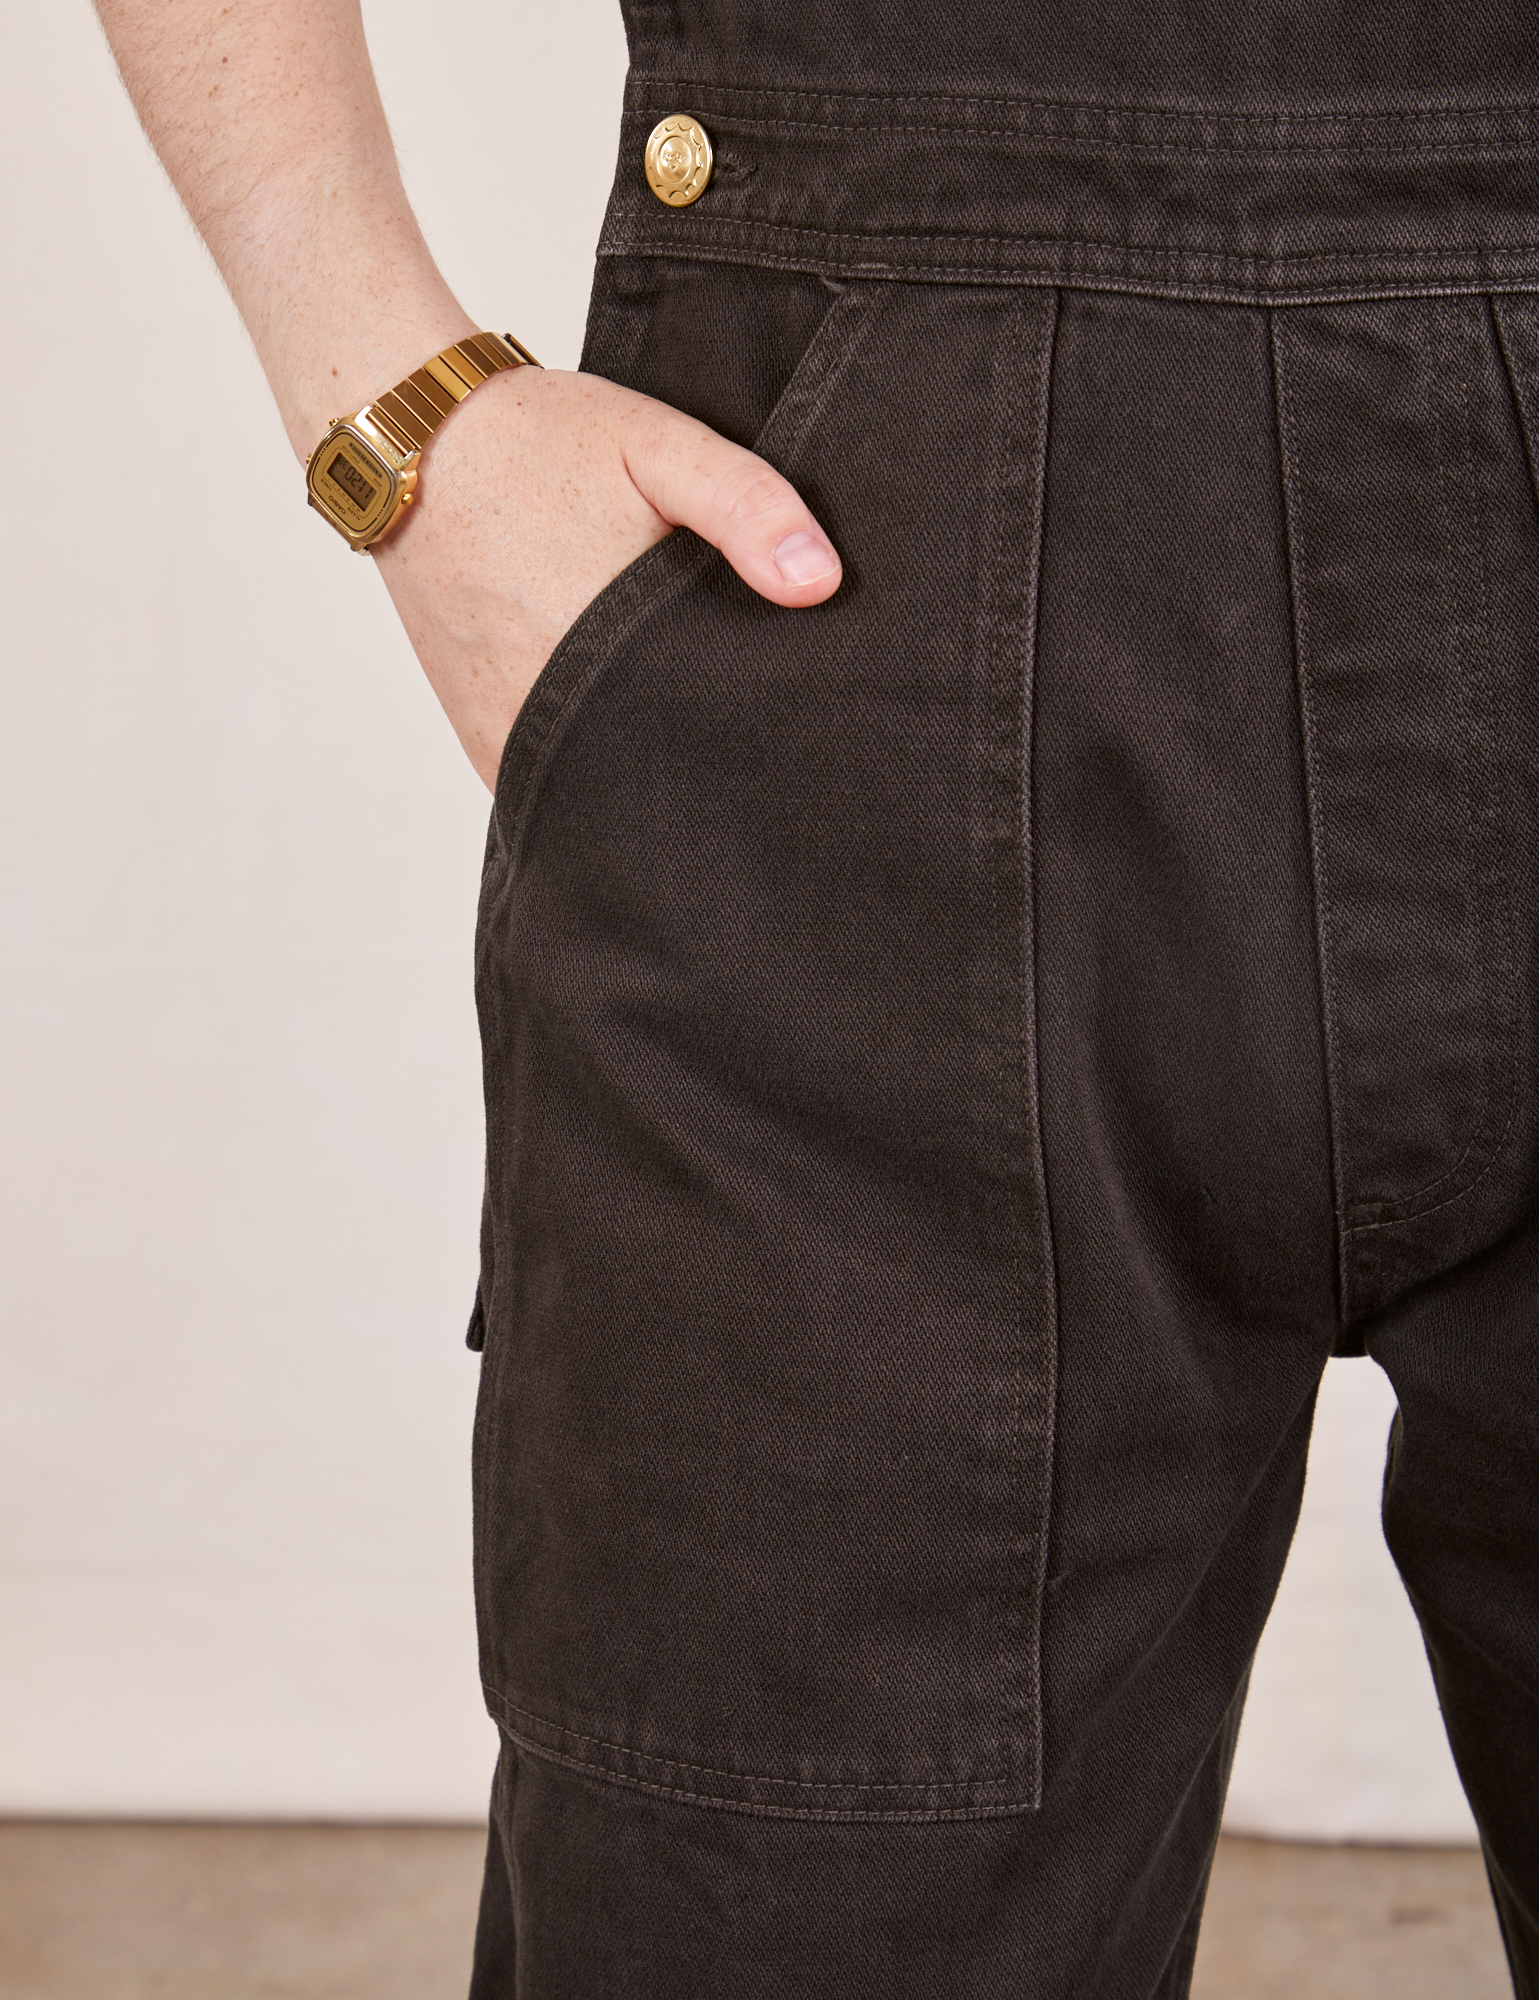 Front pocket close up of Original Overalls in Mono Espresso. Hana has her hand in the pocket.